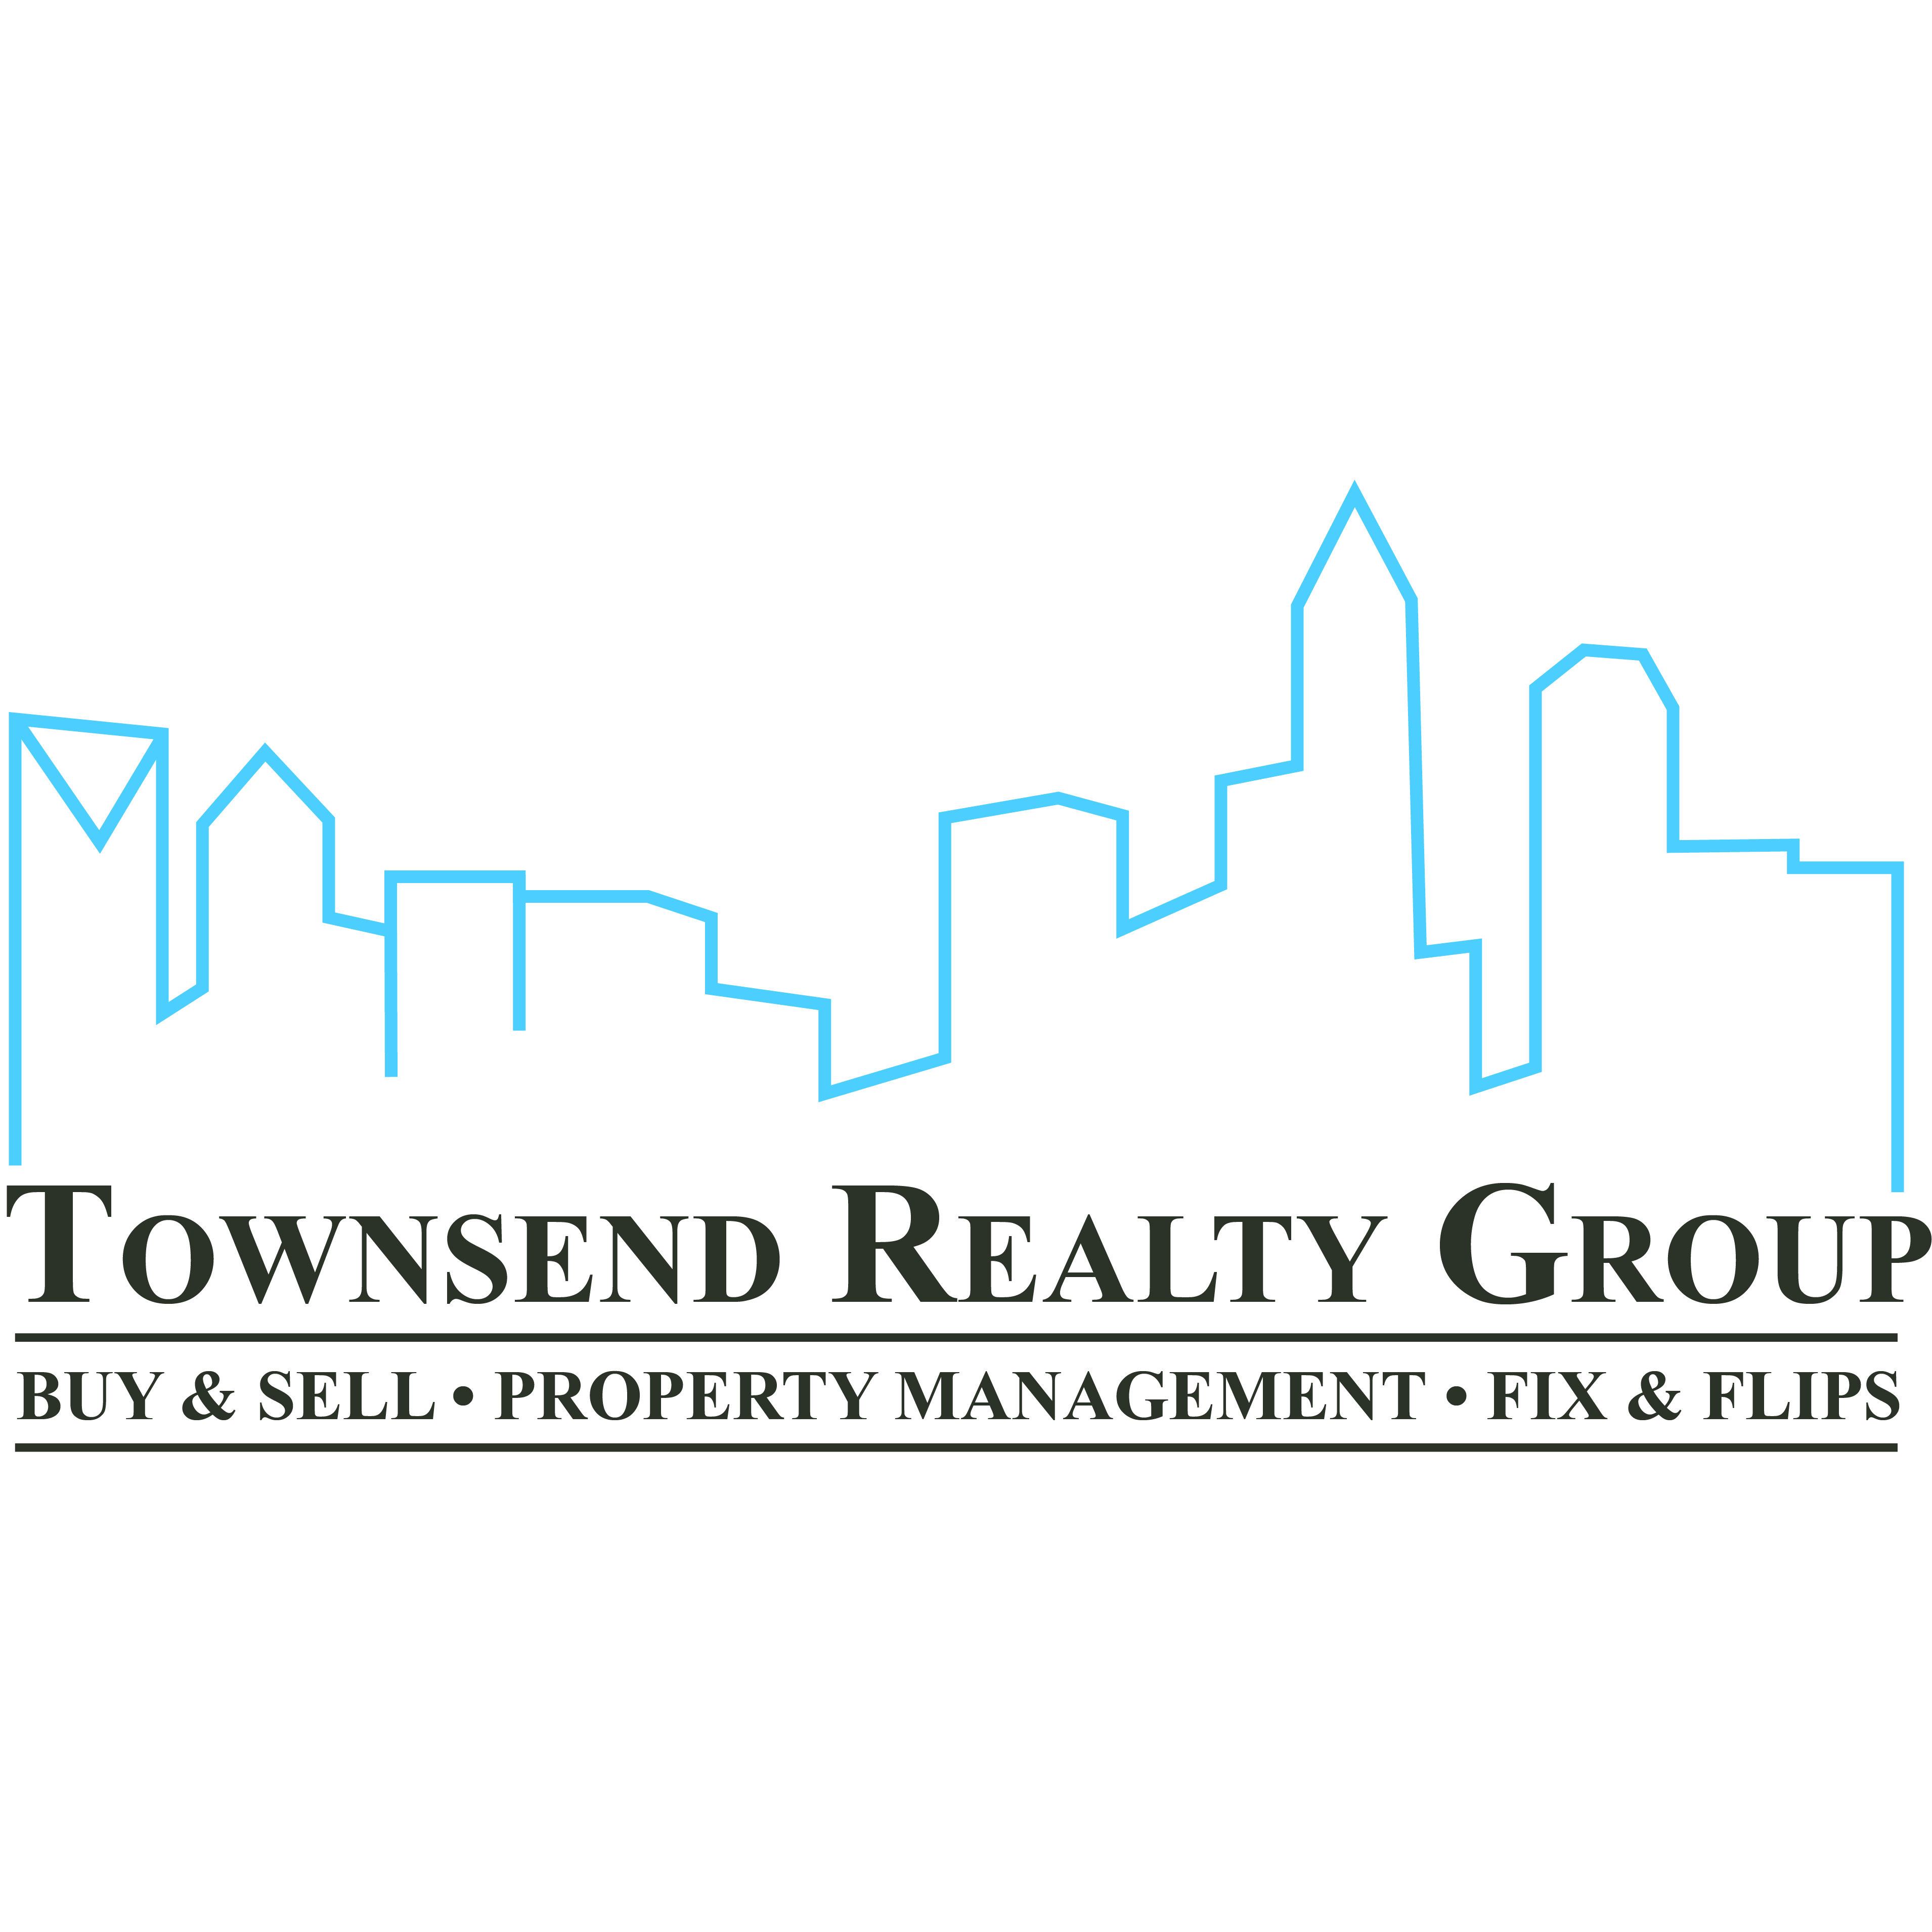 Townsend Realty Group Logo